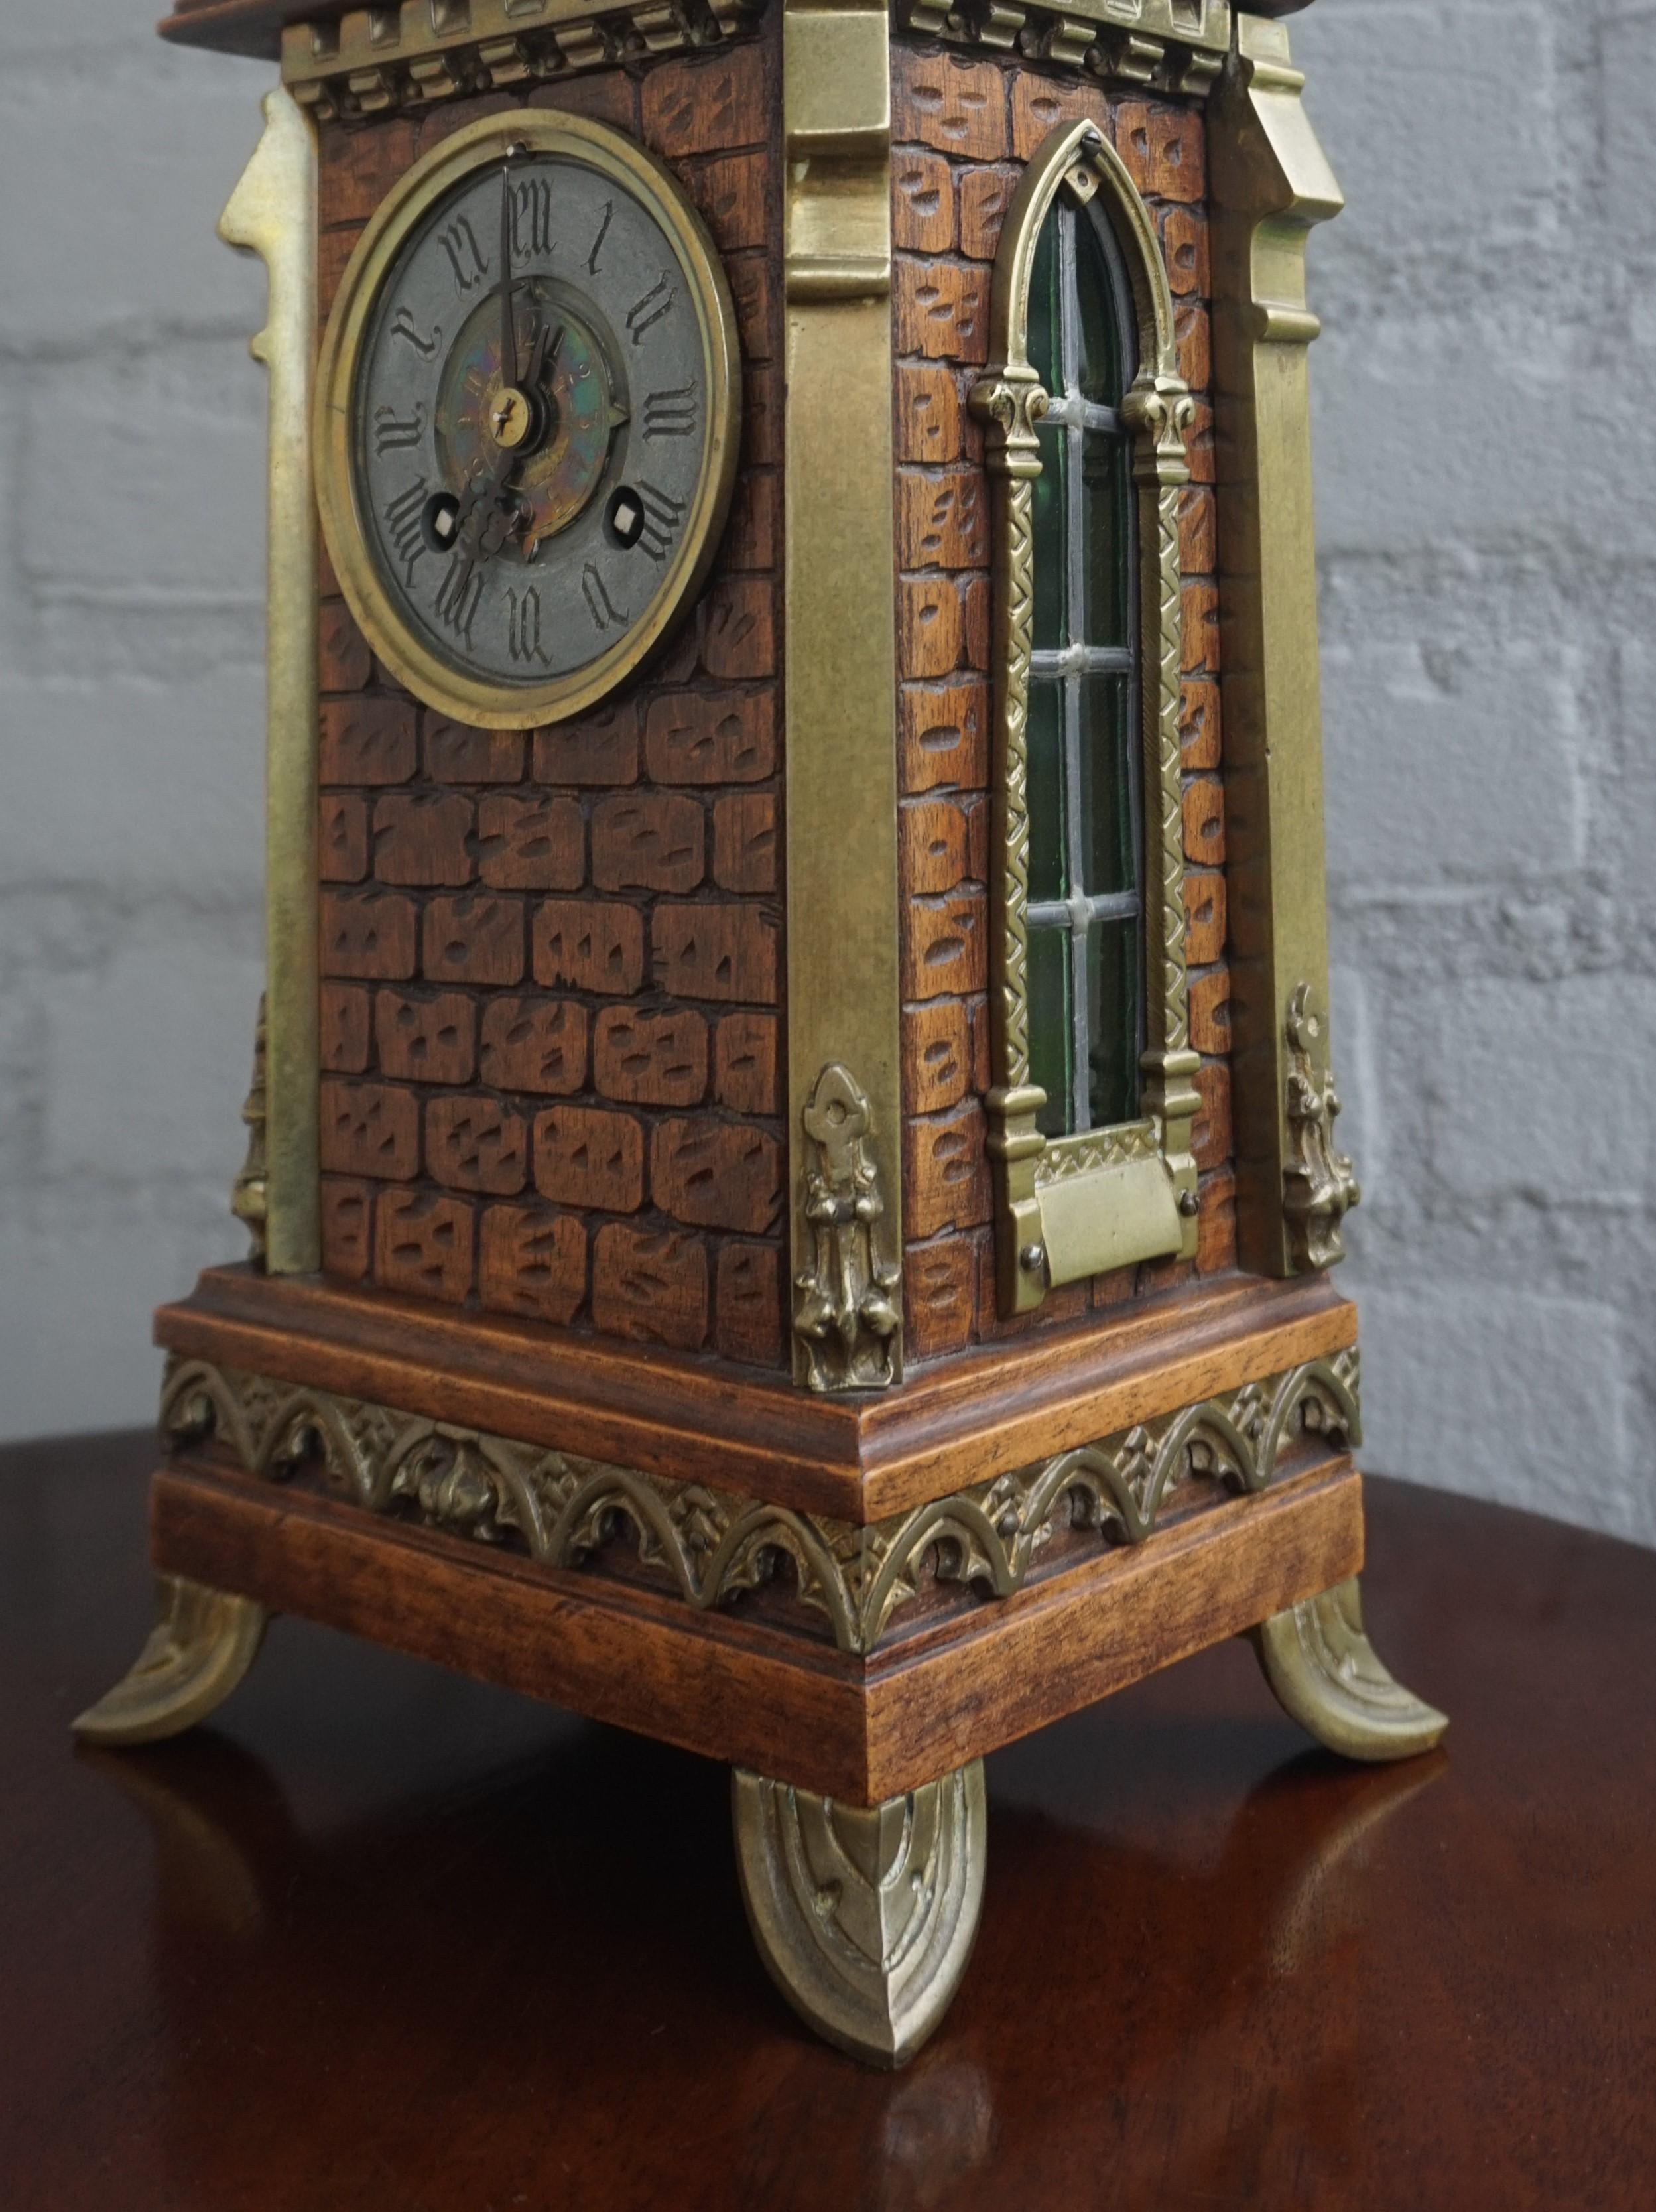 Unique cathedral design clock for the collectors of truly stylish Gothic antiques.

Finding this unique Gothic table clock truly felt like a blessing. The overall design is remarkable, but the combination of the craftsmanship of the carved nutwood